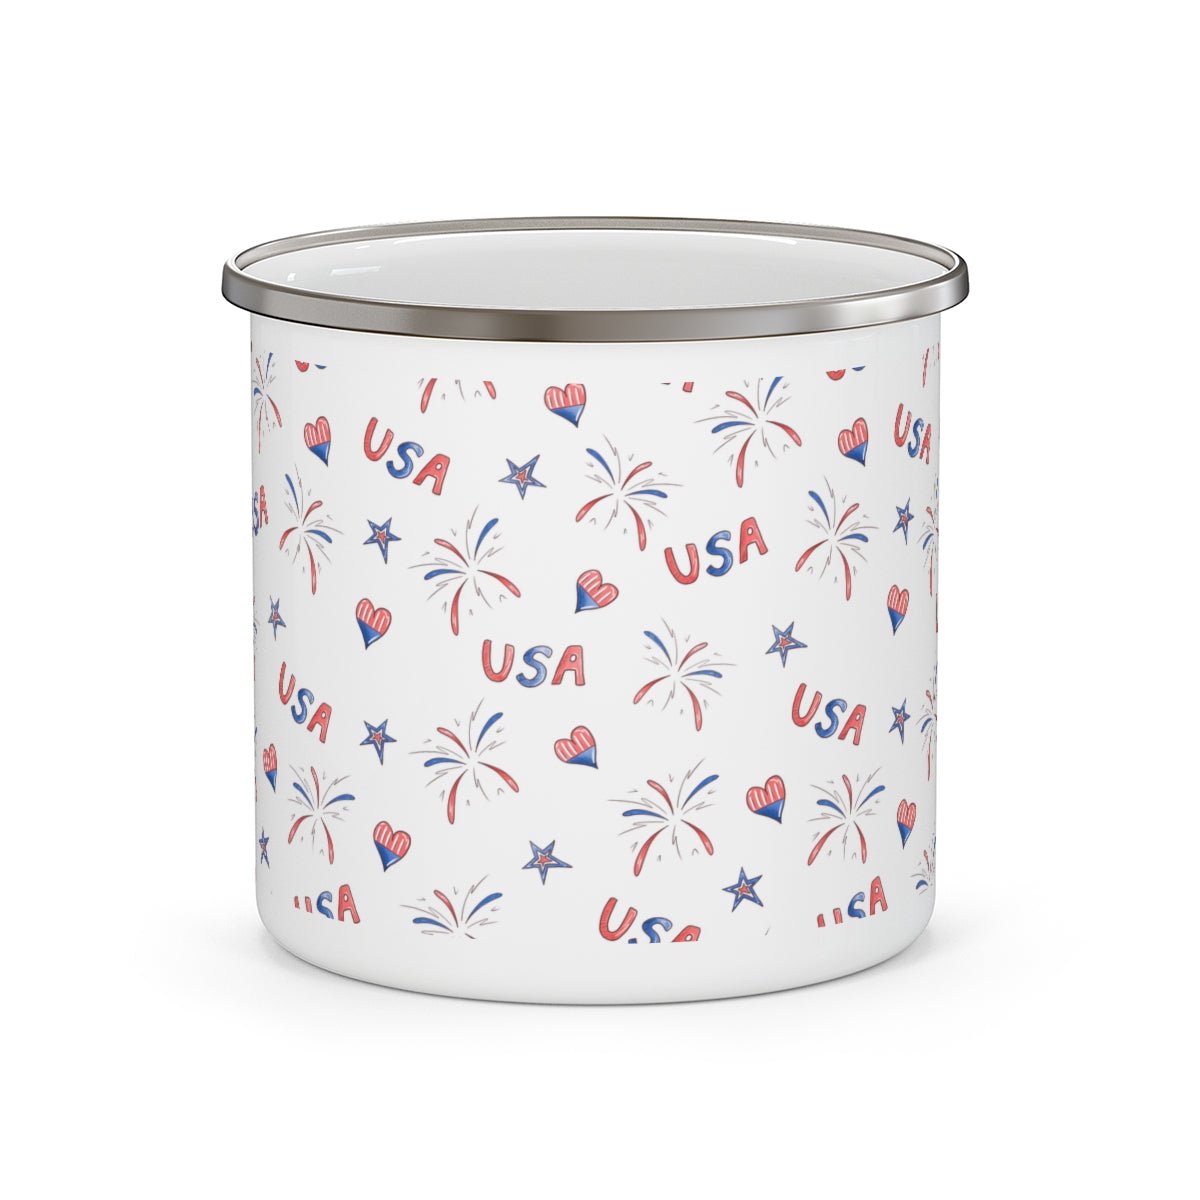 Hearts and Fireworks Stainless Steel Camping Mug - Puffin Lime